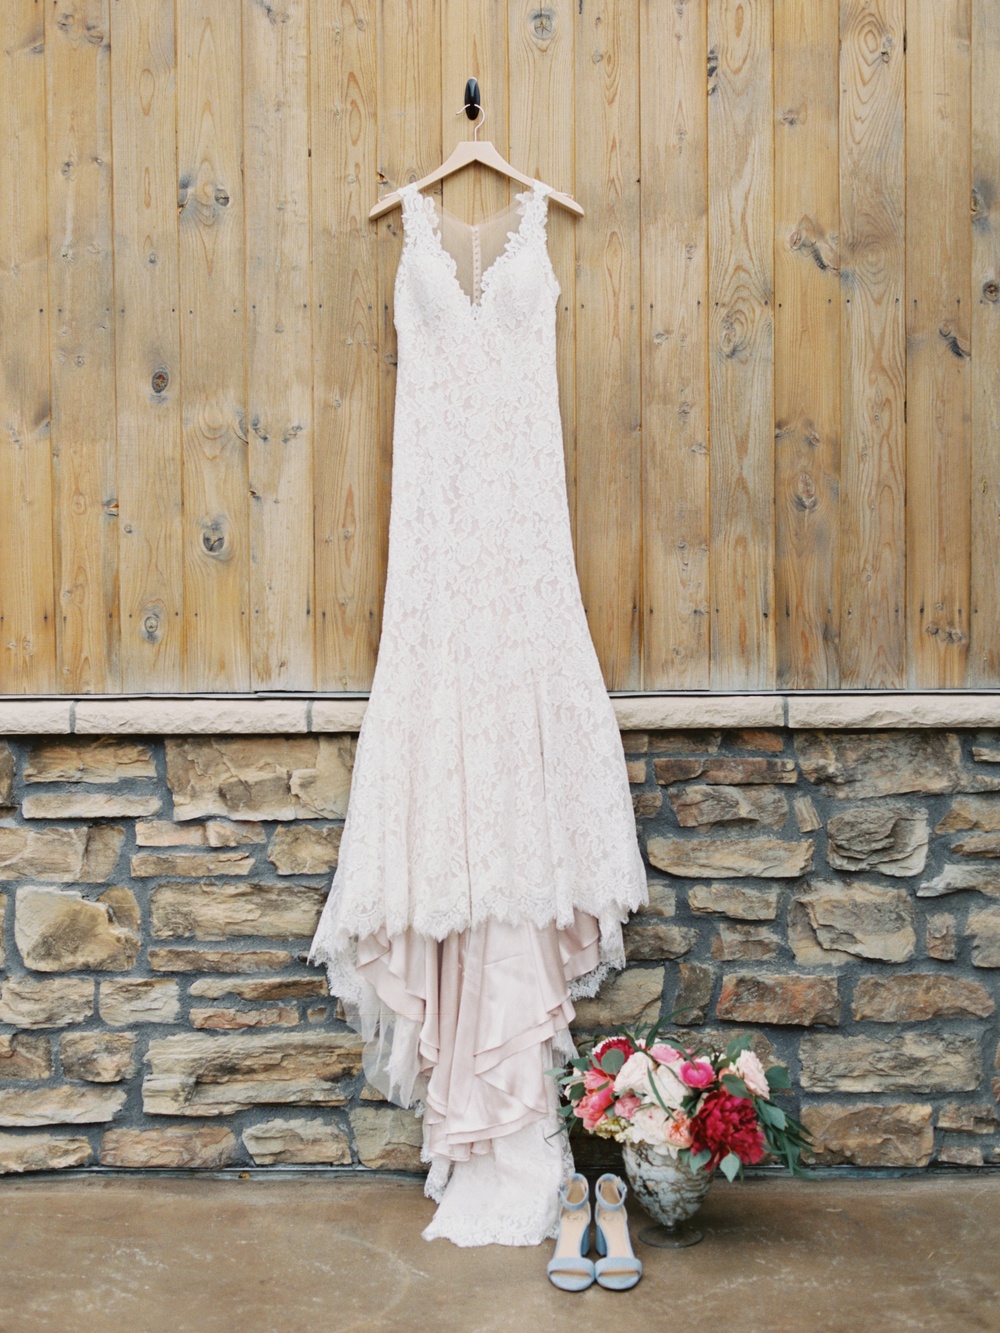 Pretty Colorado Mountain Wedding with Lace and Peonies ⋆ Ruffled